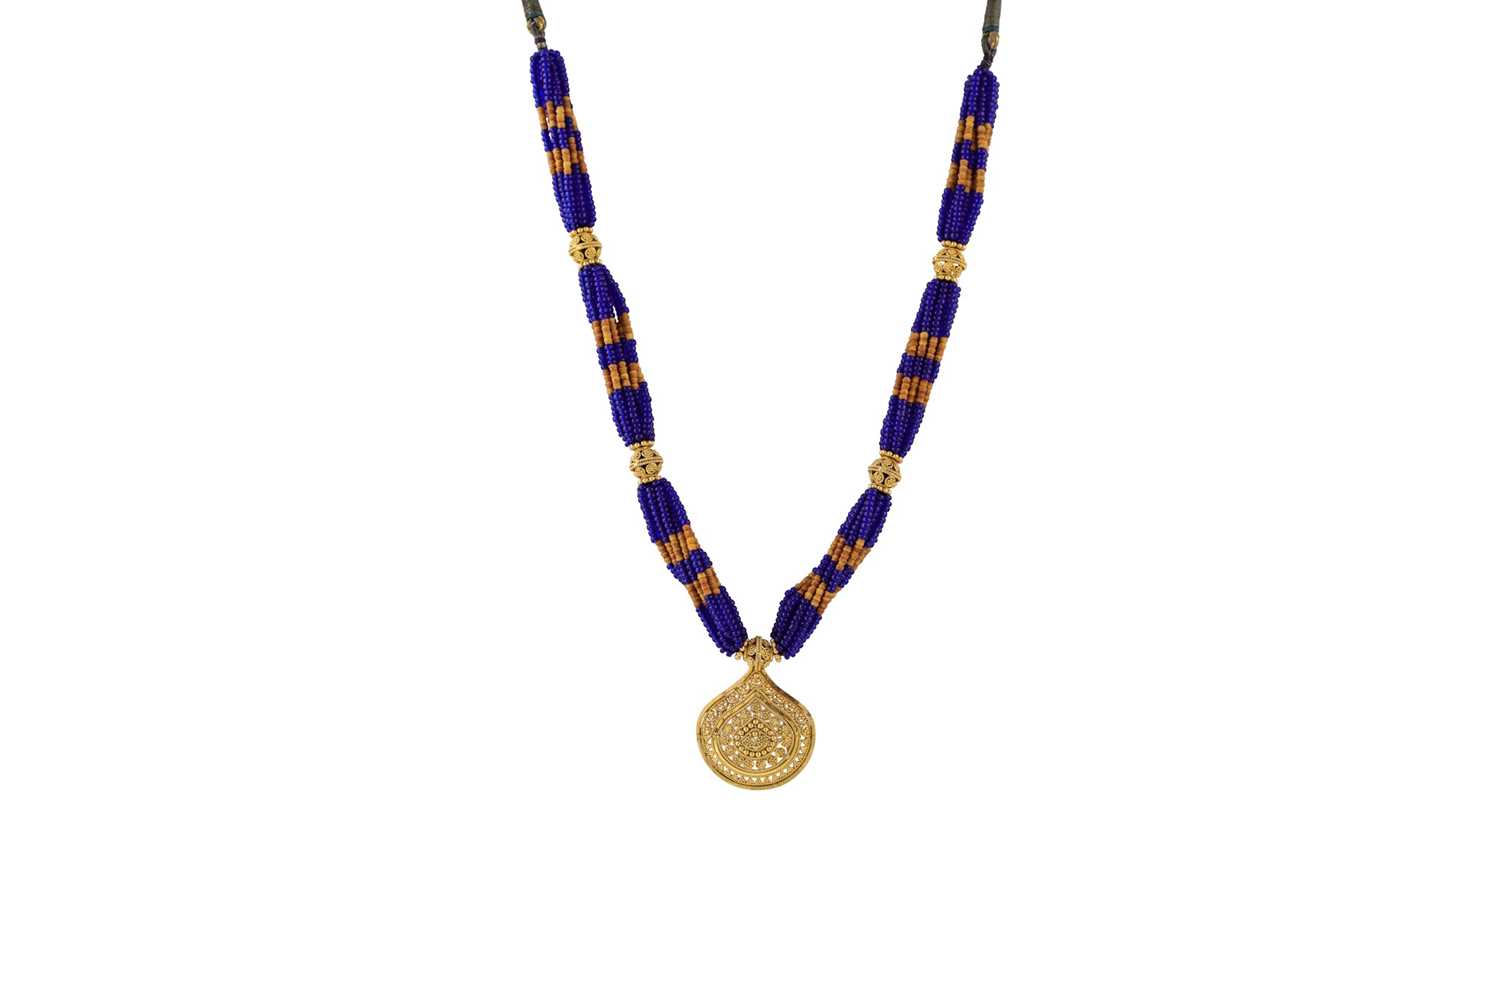 Lot 25 - A 22CT GOLD PENDANT, on a beaded necklace